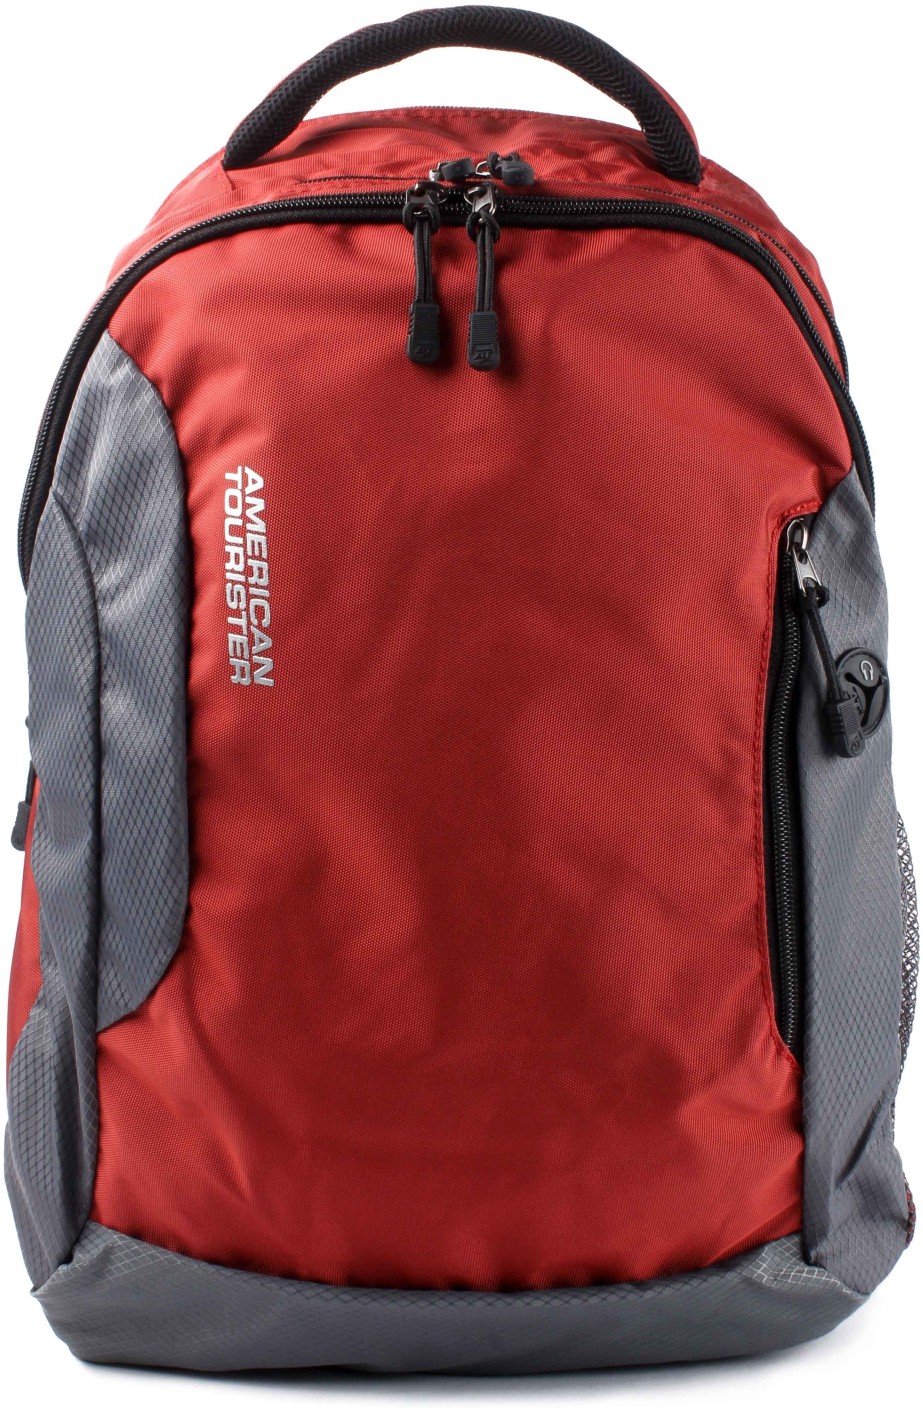 American Tourister Buzz Backpack RST - Price in India | www.bagssaleusa.com/louis-vuitton/